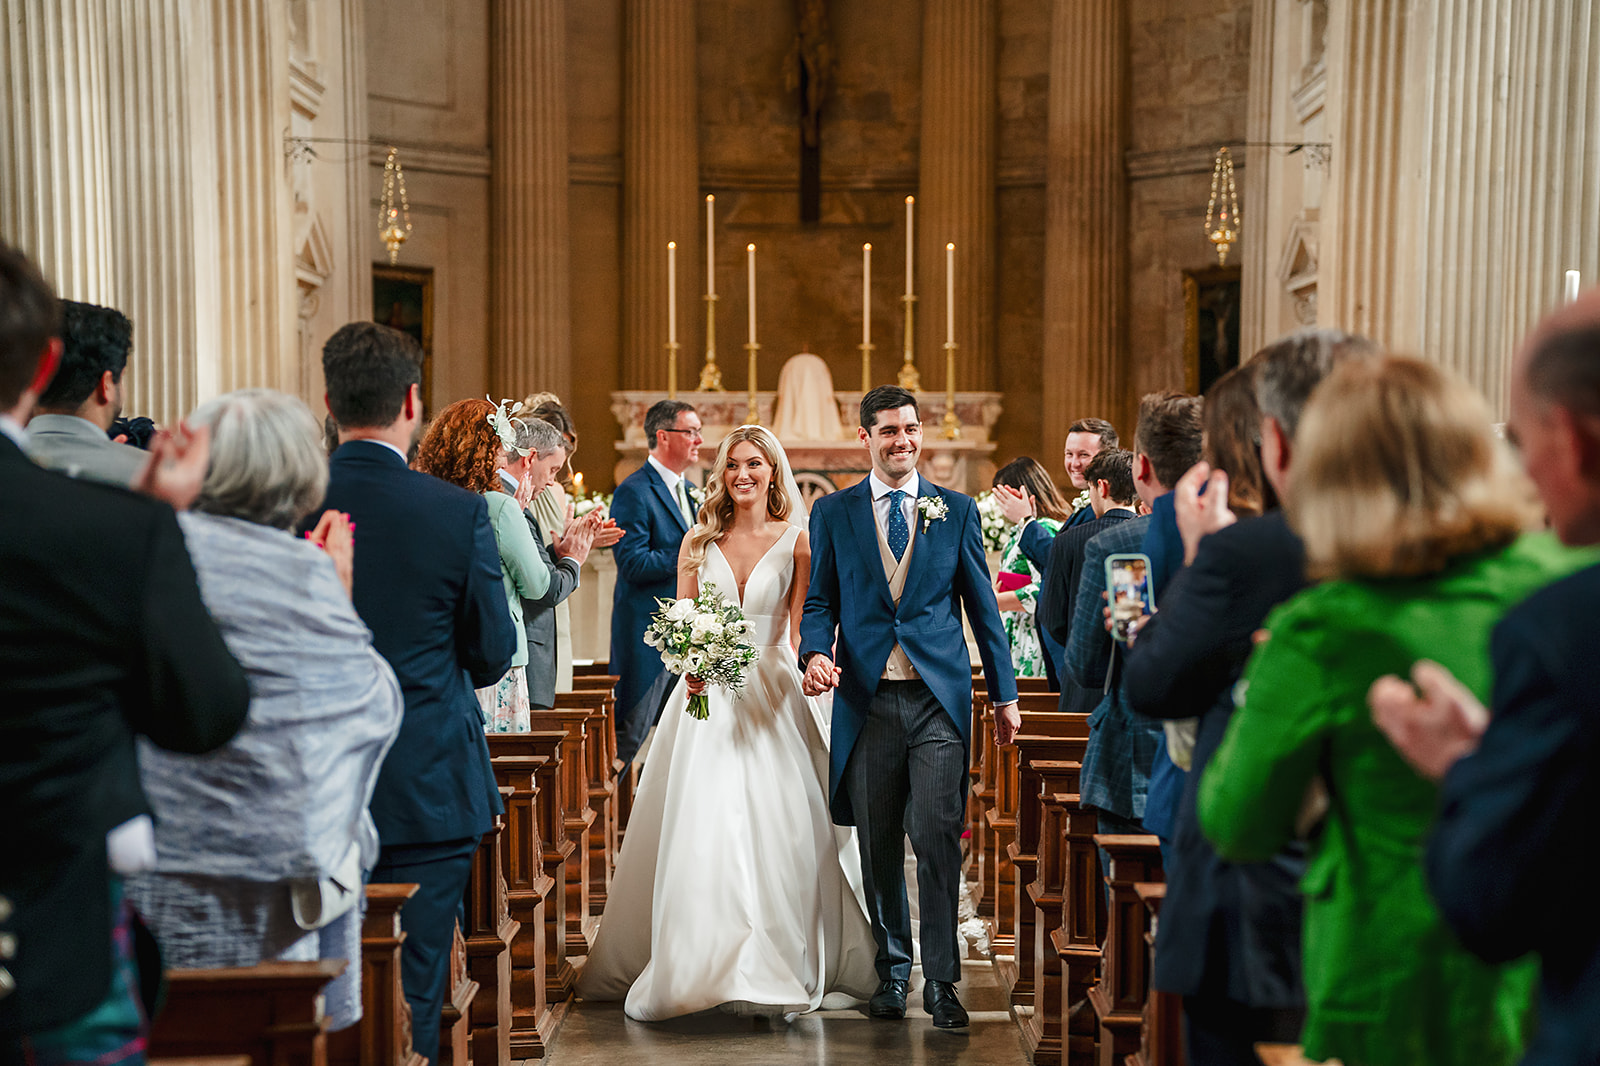 A bride and groom walking down the aisle of Prior Park Church in Bath during their wedding ceremony.